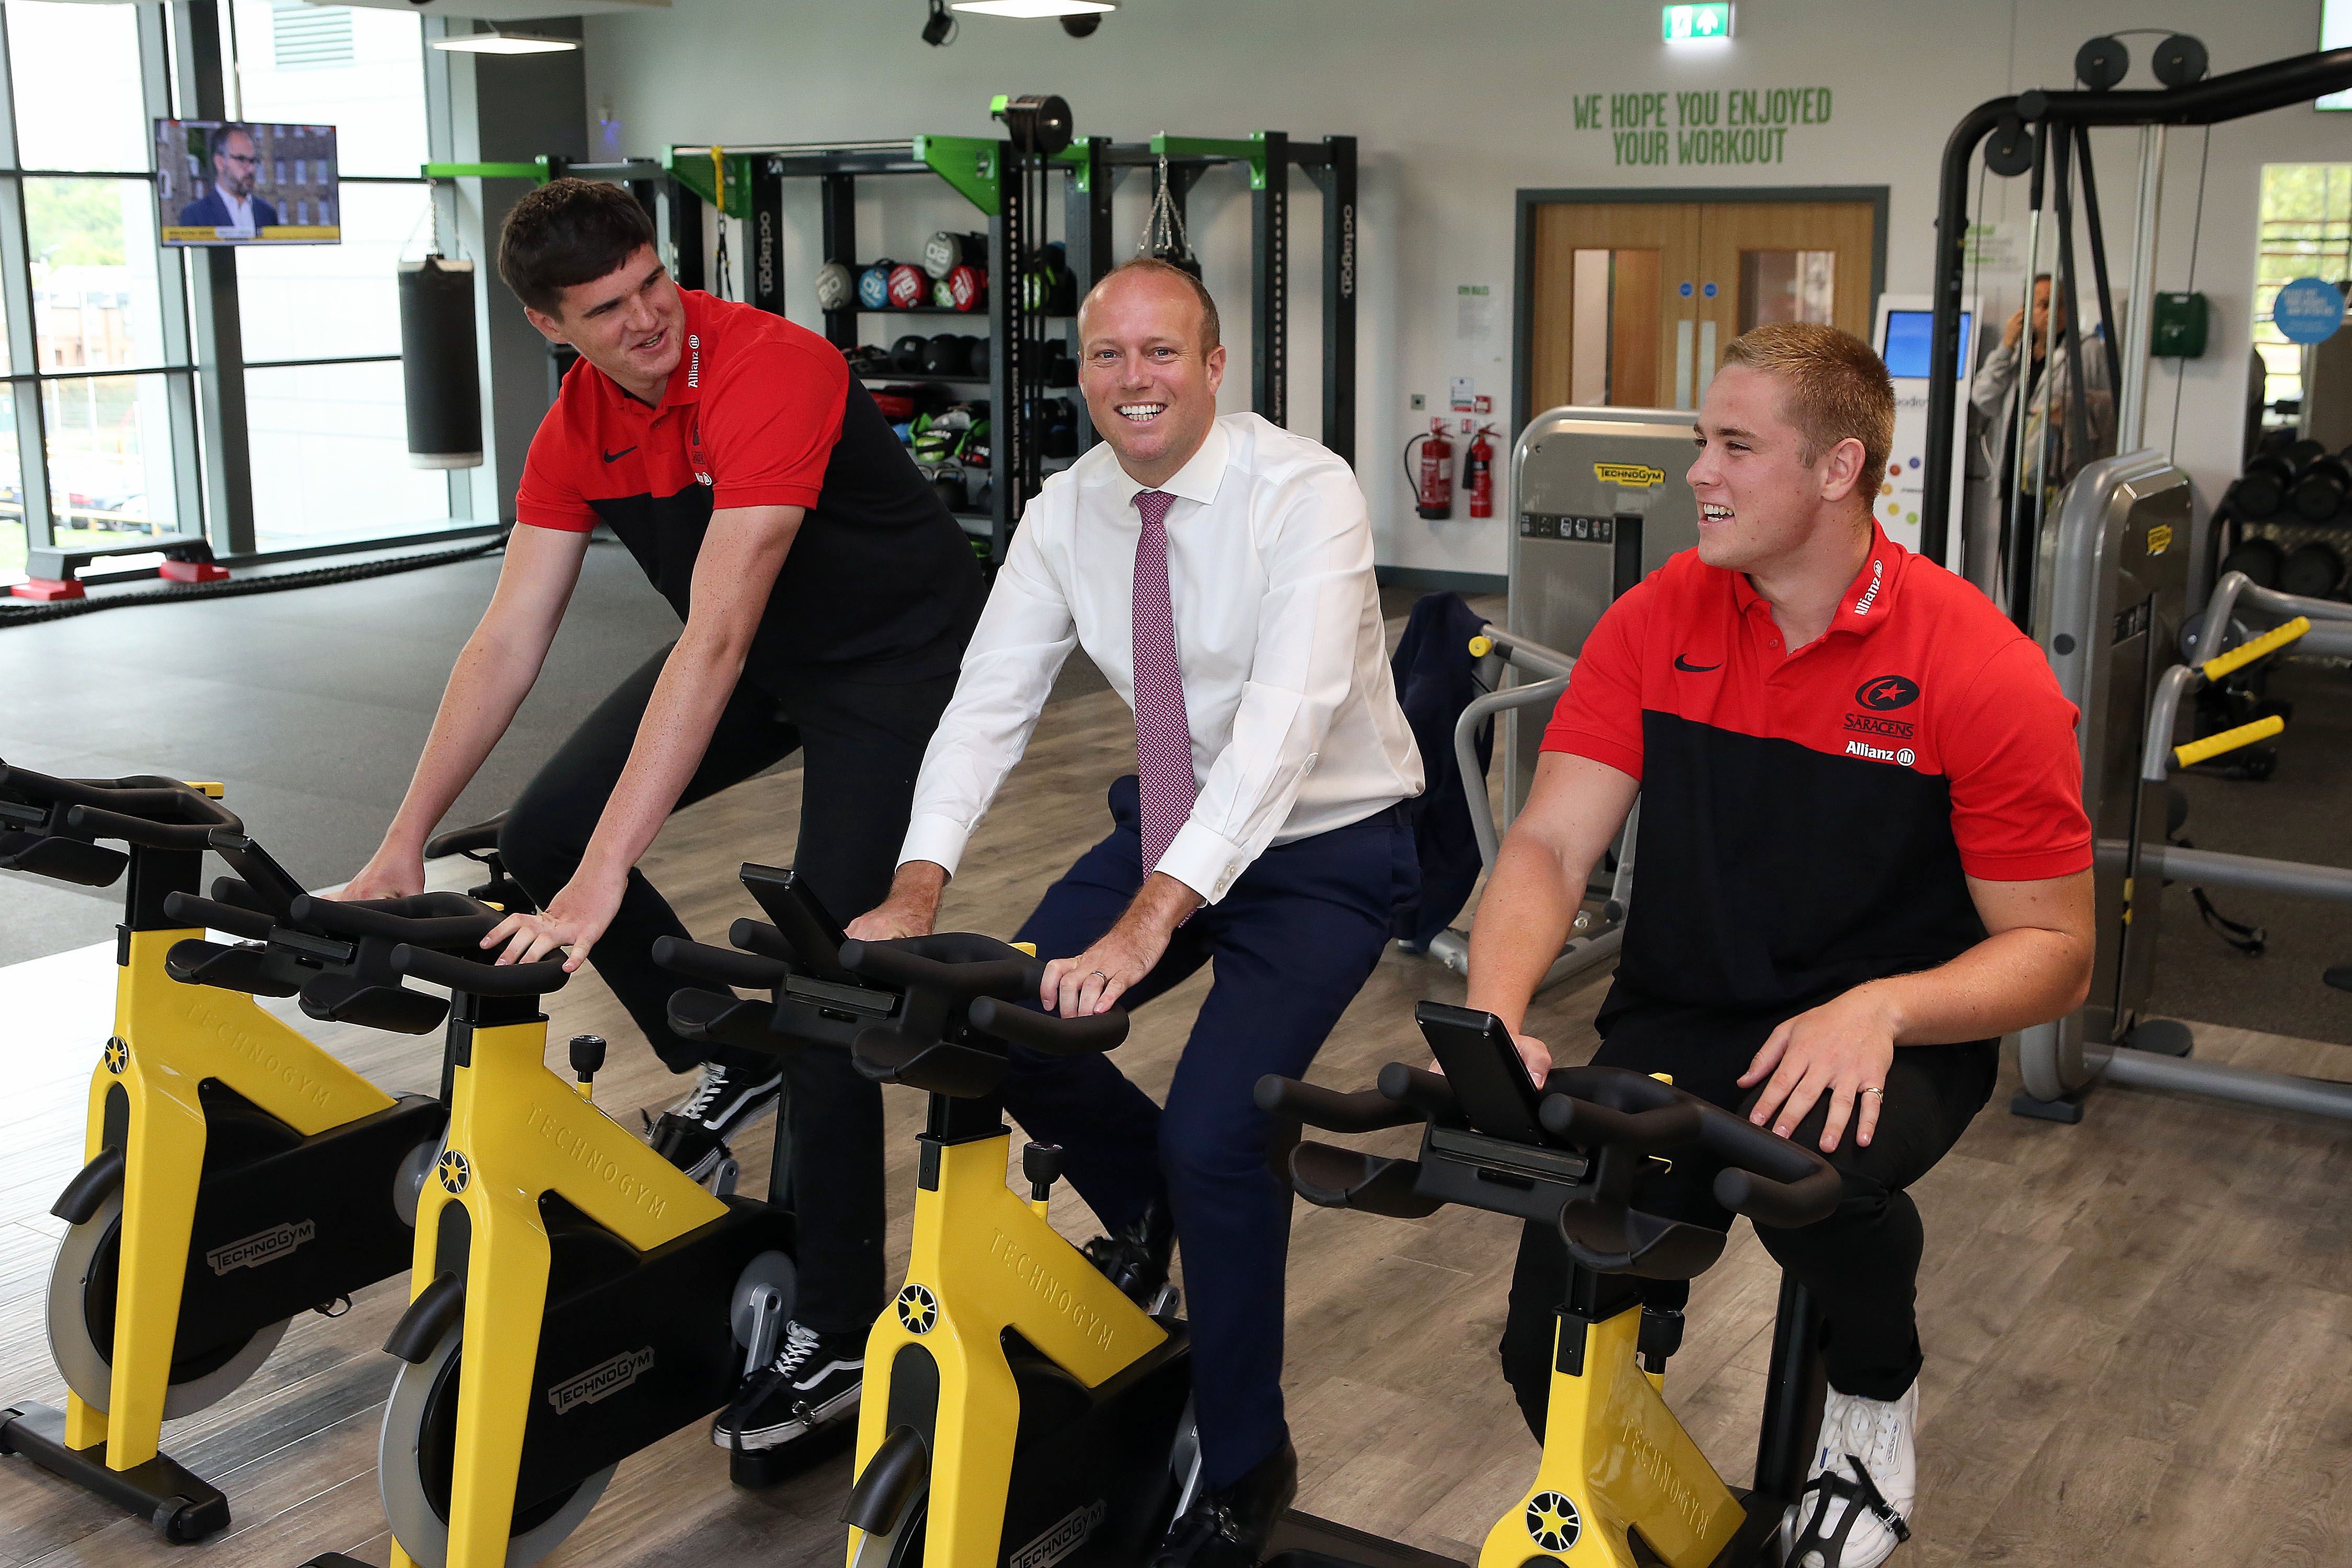 Leader of Barnet Council, Councillor Dan Thomas, with Saracens RFC players Cameron Boon (left) and Tobias Munday on the exercise bikes at New Barnet Leisure Centre.